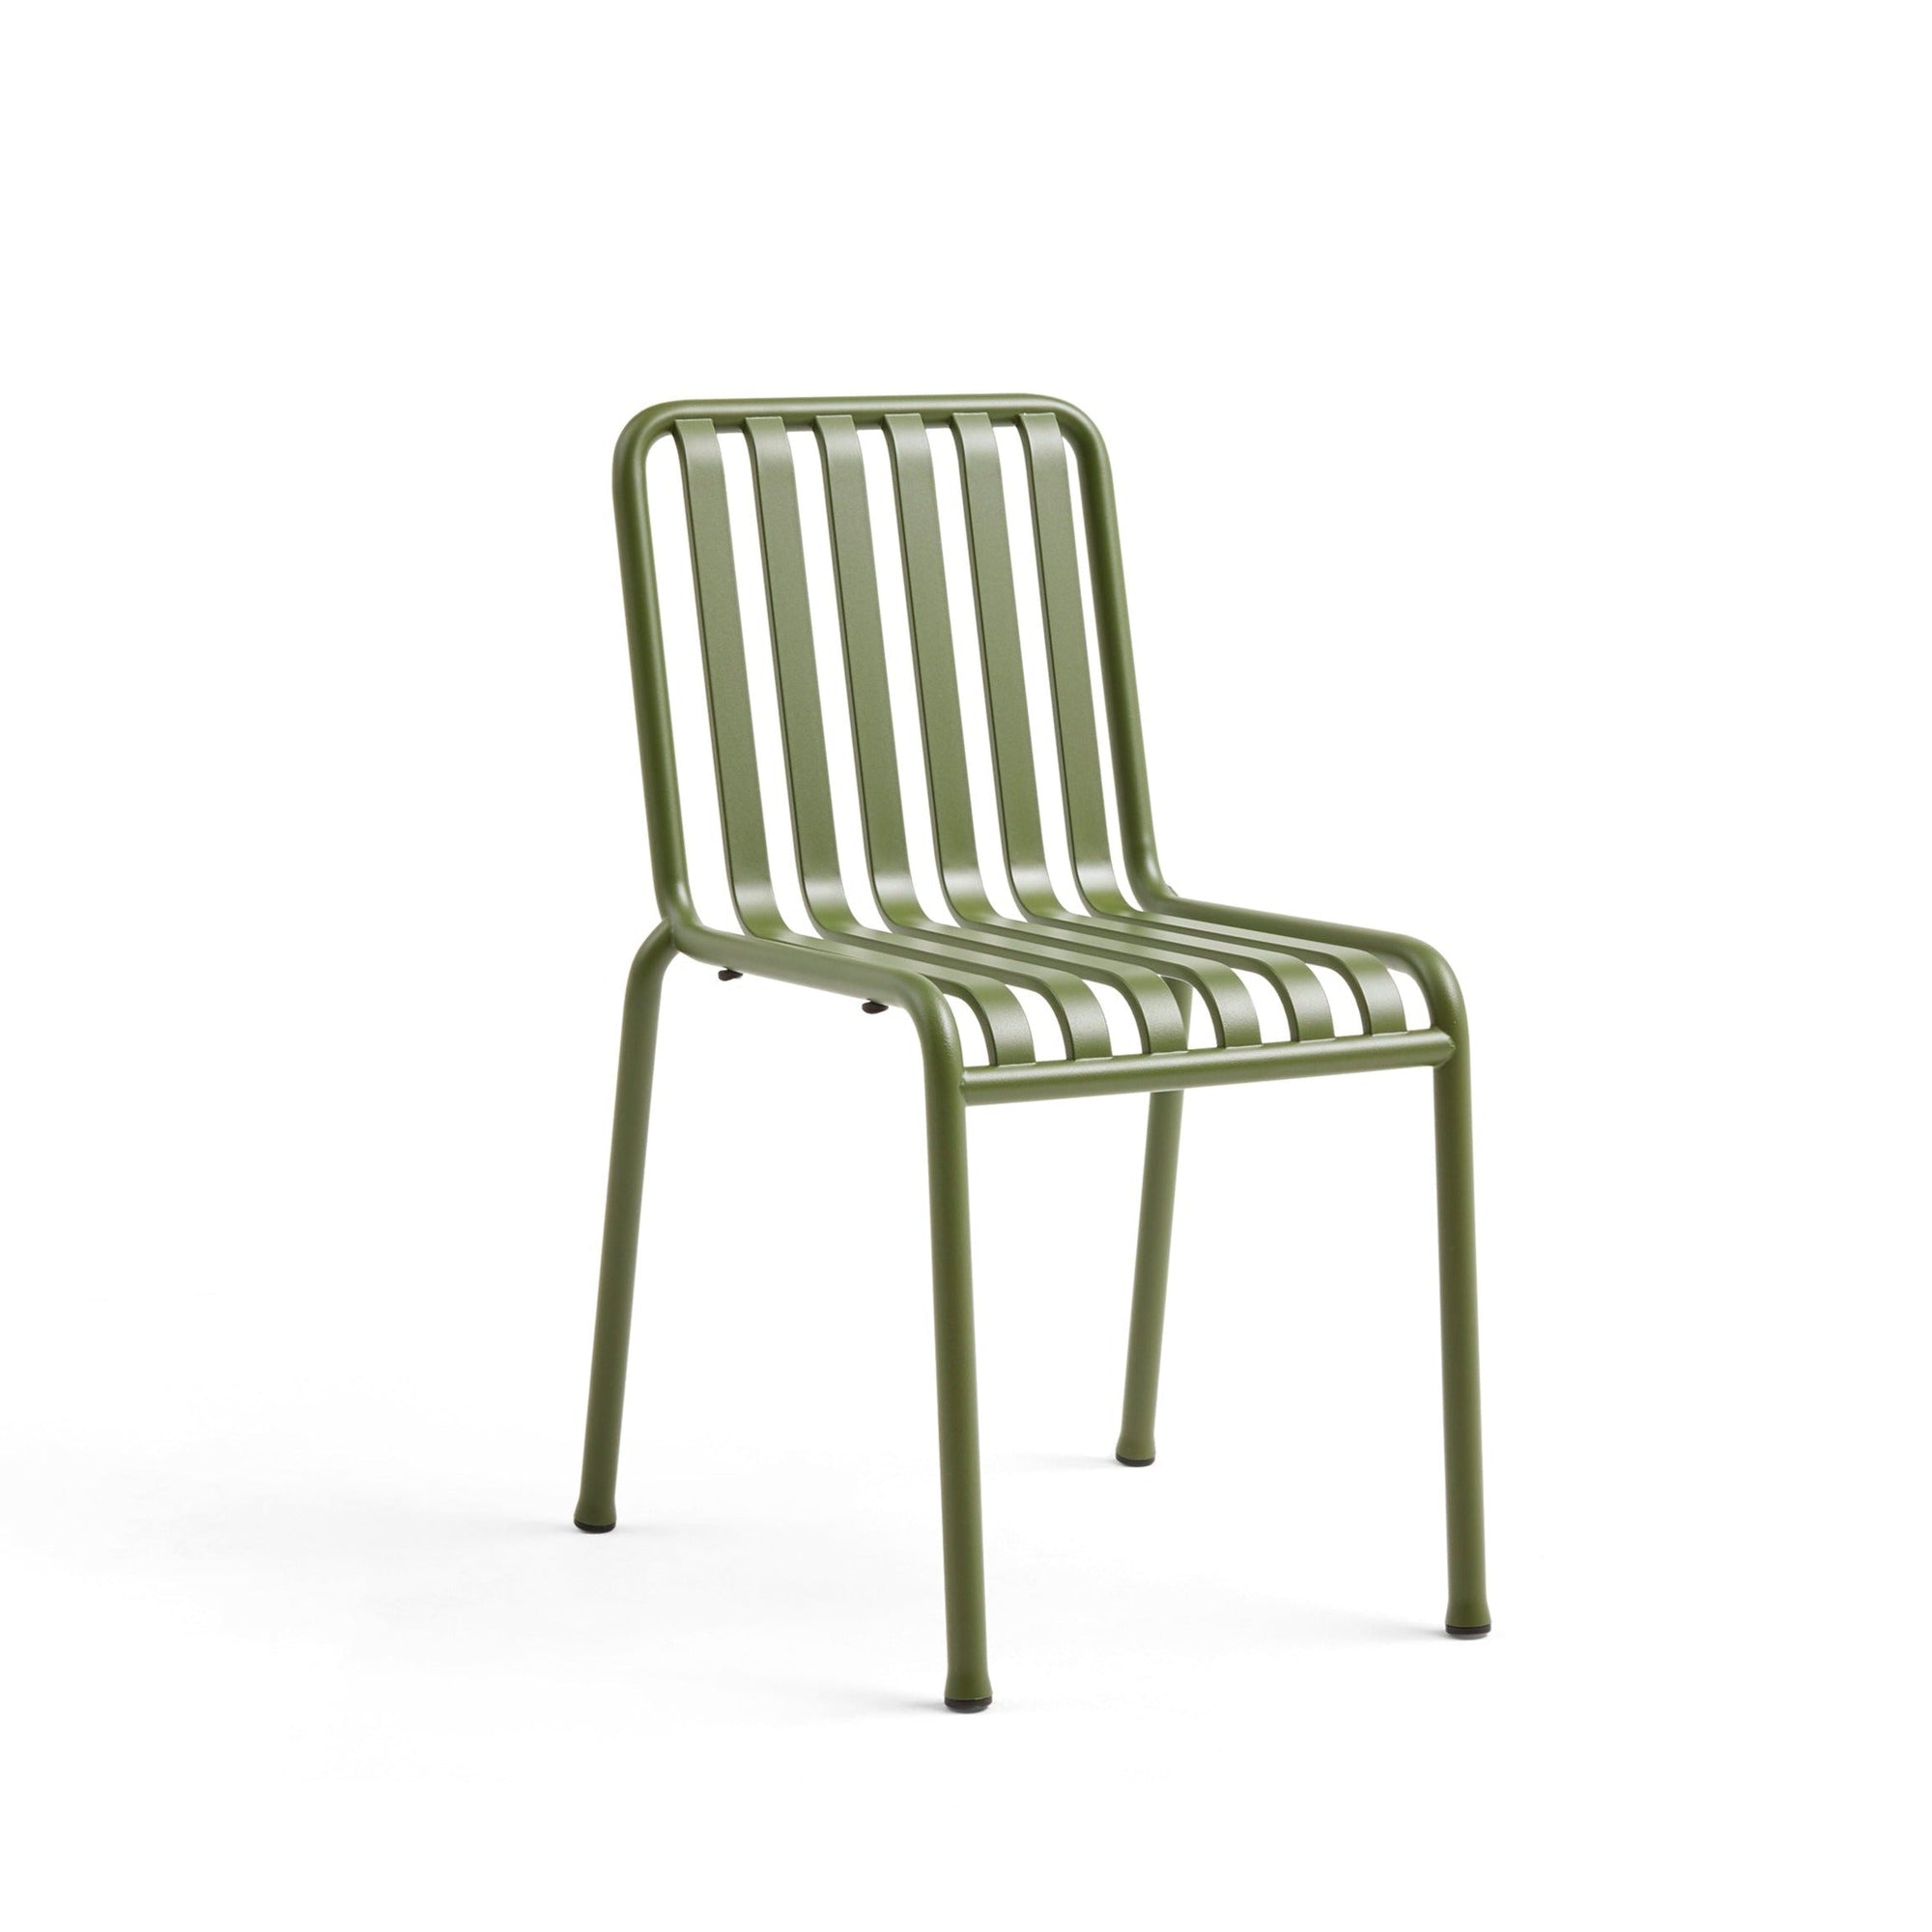 Chaise empilable Palissade - Hay Vert Olive, Anthracite, Argent, Gr